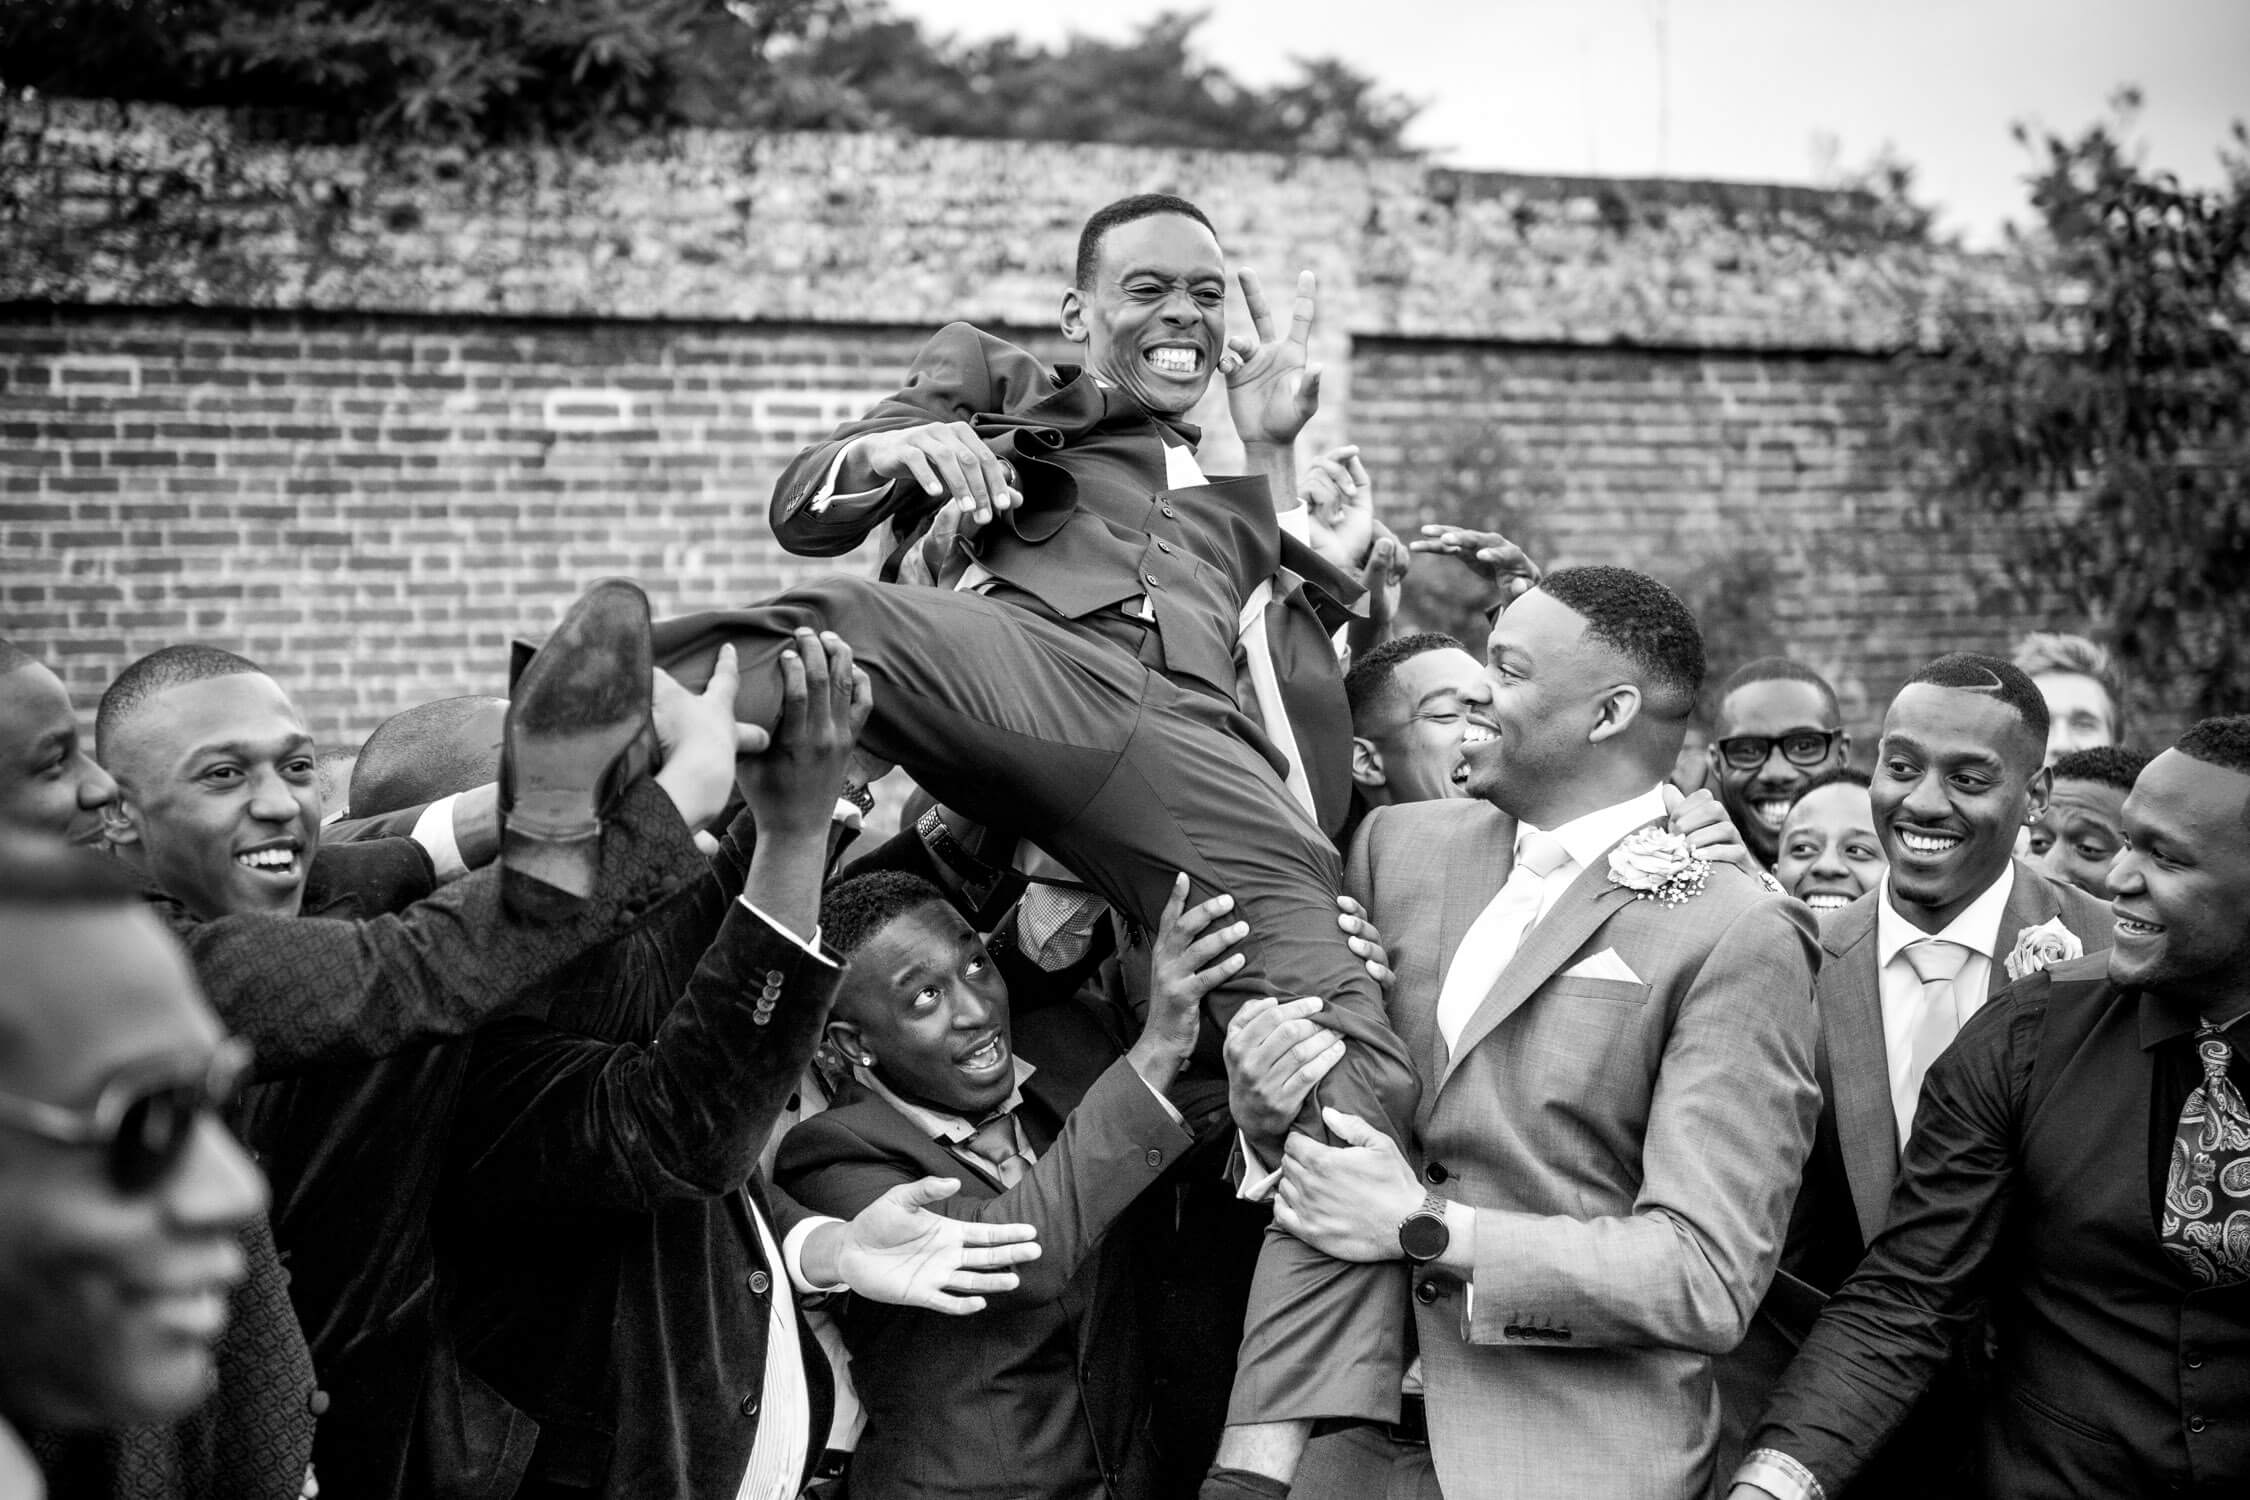 Groom being lifted in the air